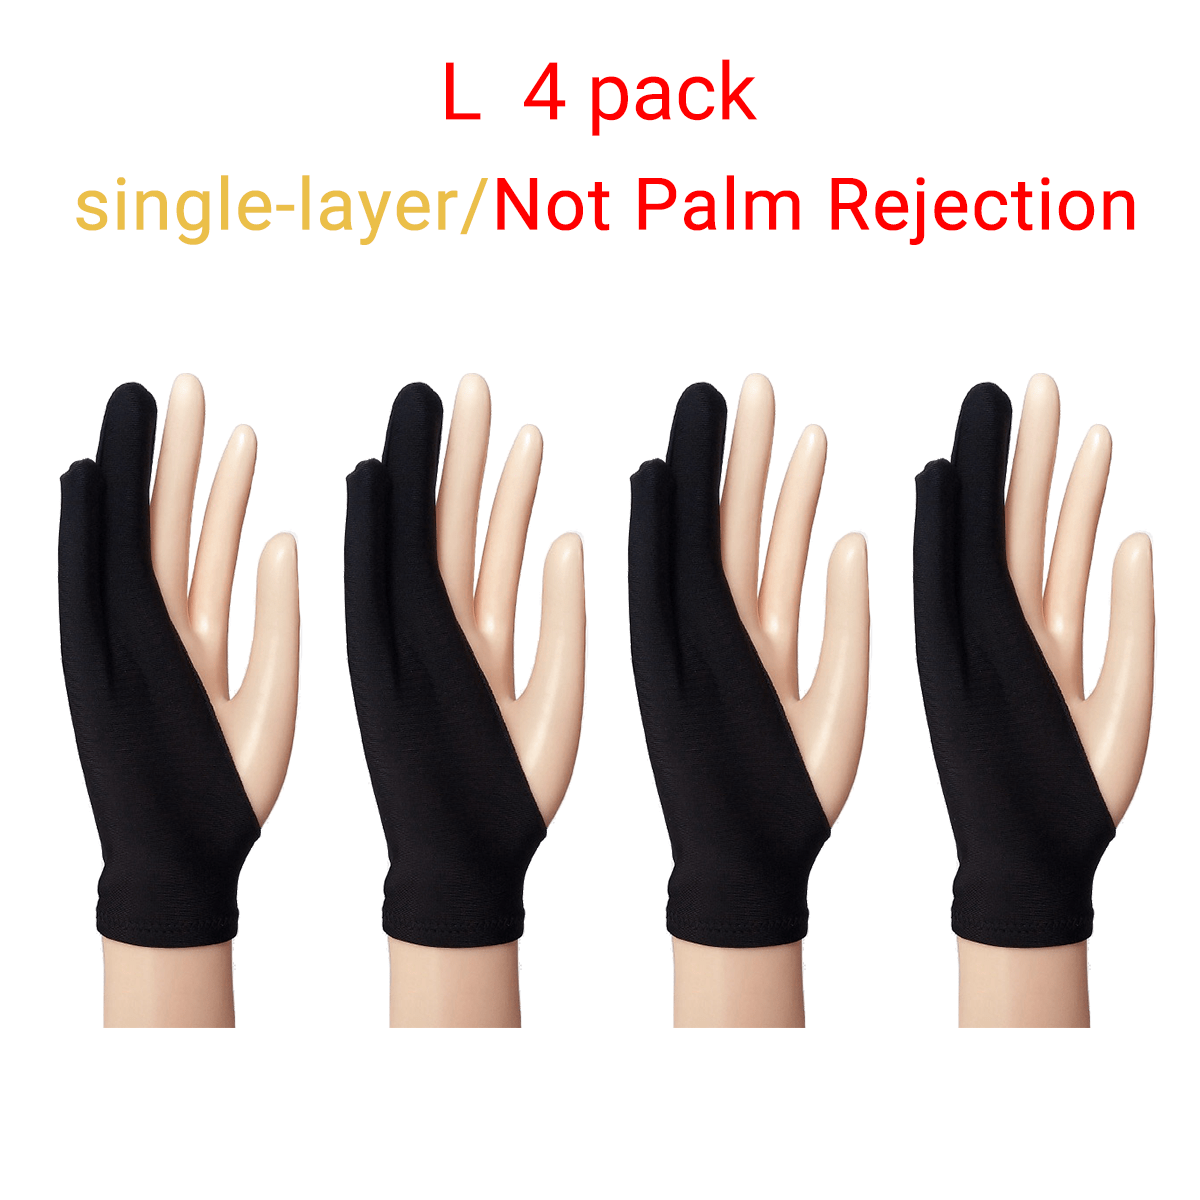  2pcs Black Two-Finger Glove for Graphics Drawing